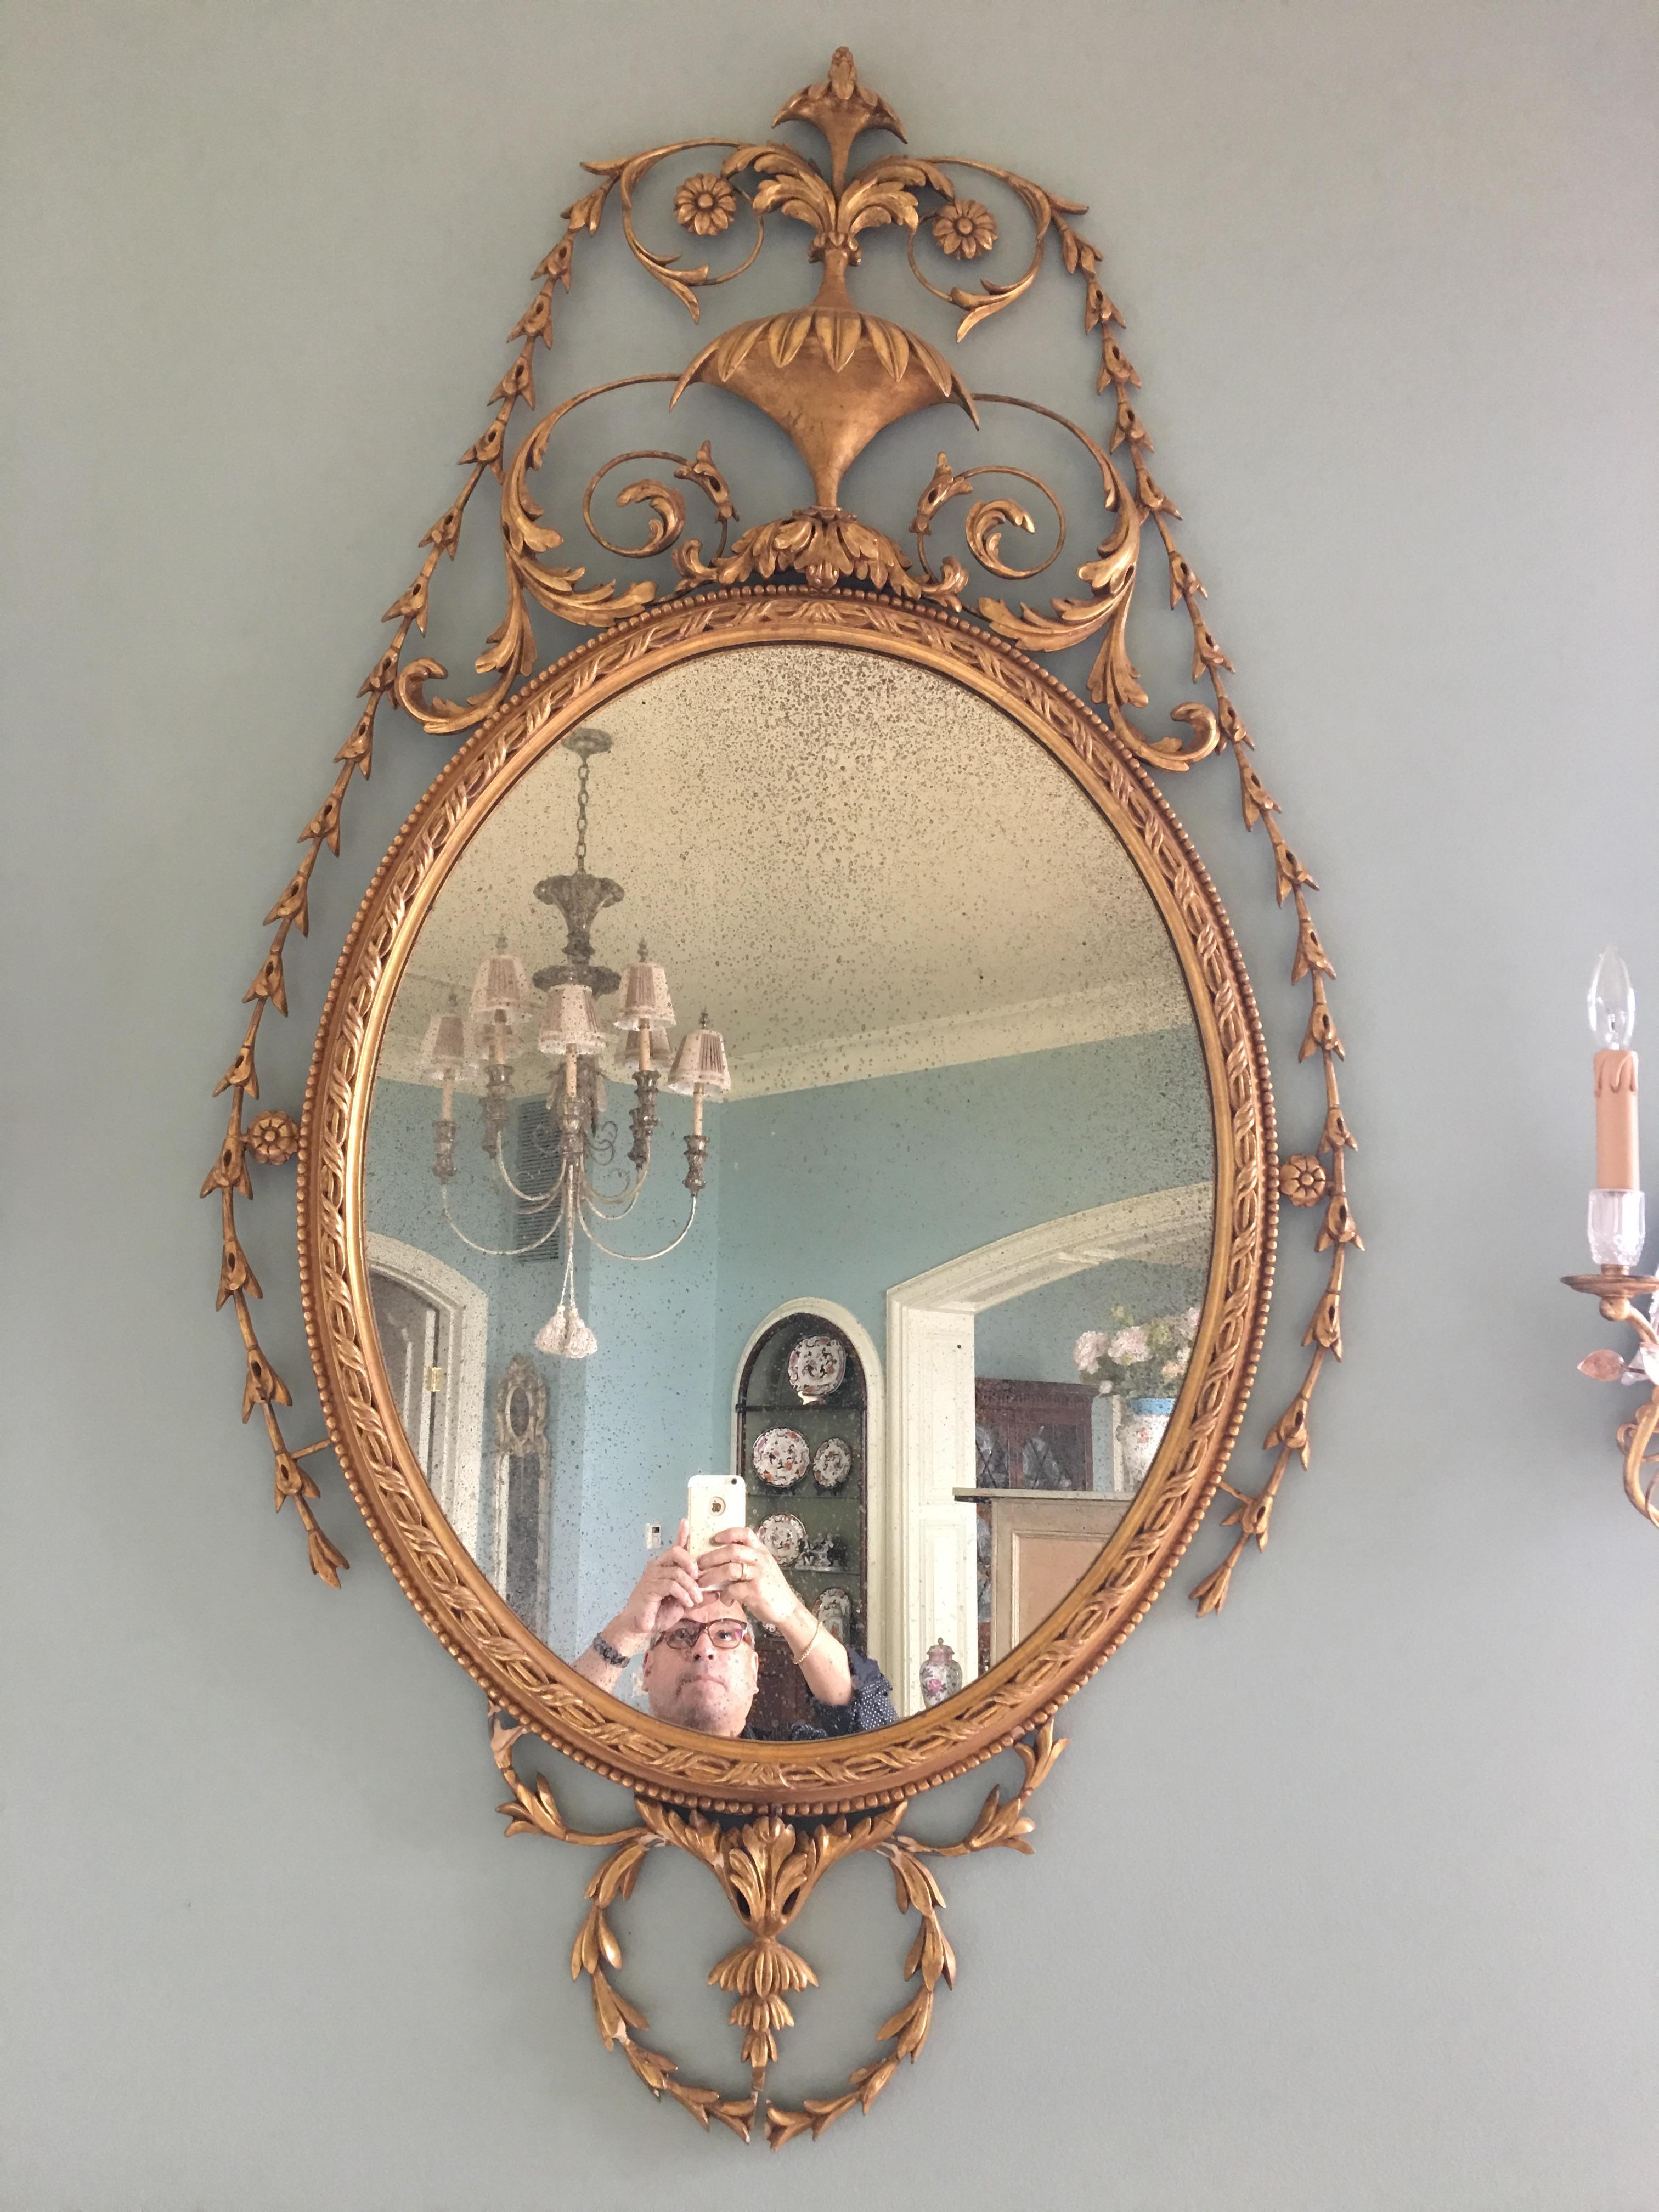 20th century giltwood mirror with a decorative urn at top.
 